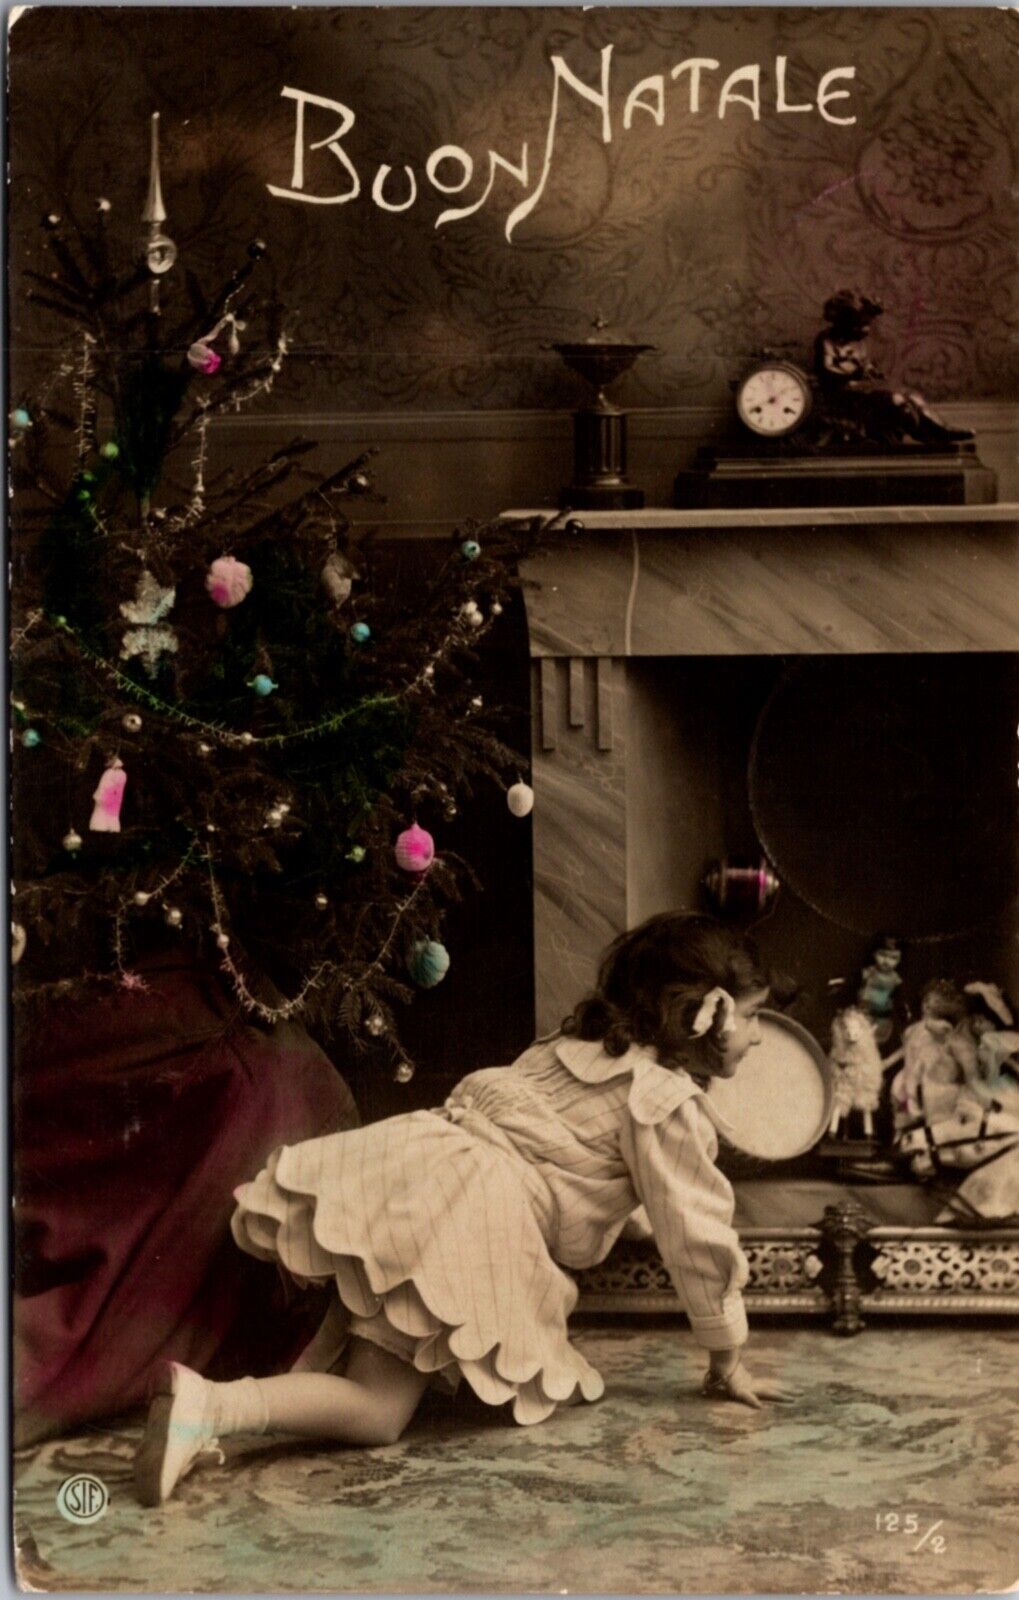 Hand Colored Real Photo Postcard Decorated Tree Little Girl Fireplace of Toys